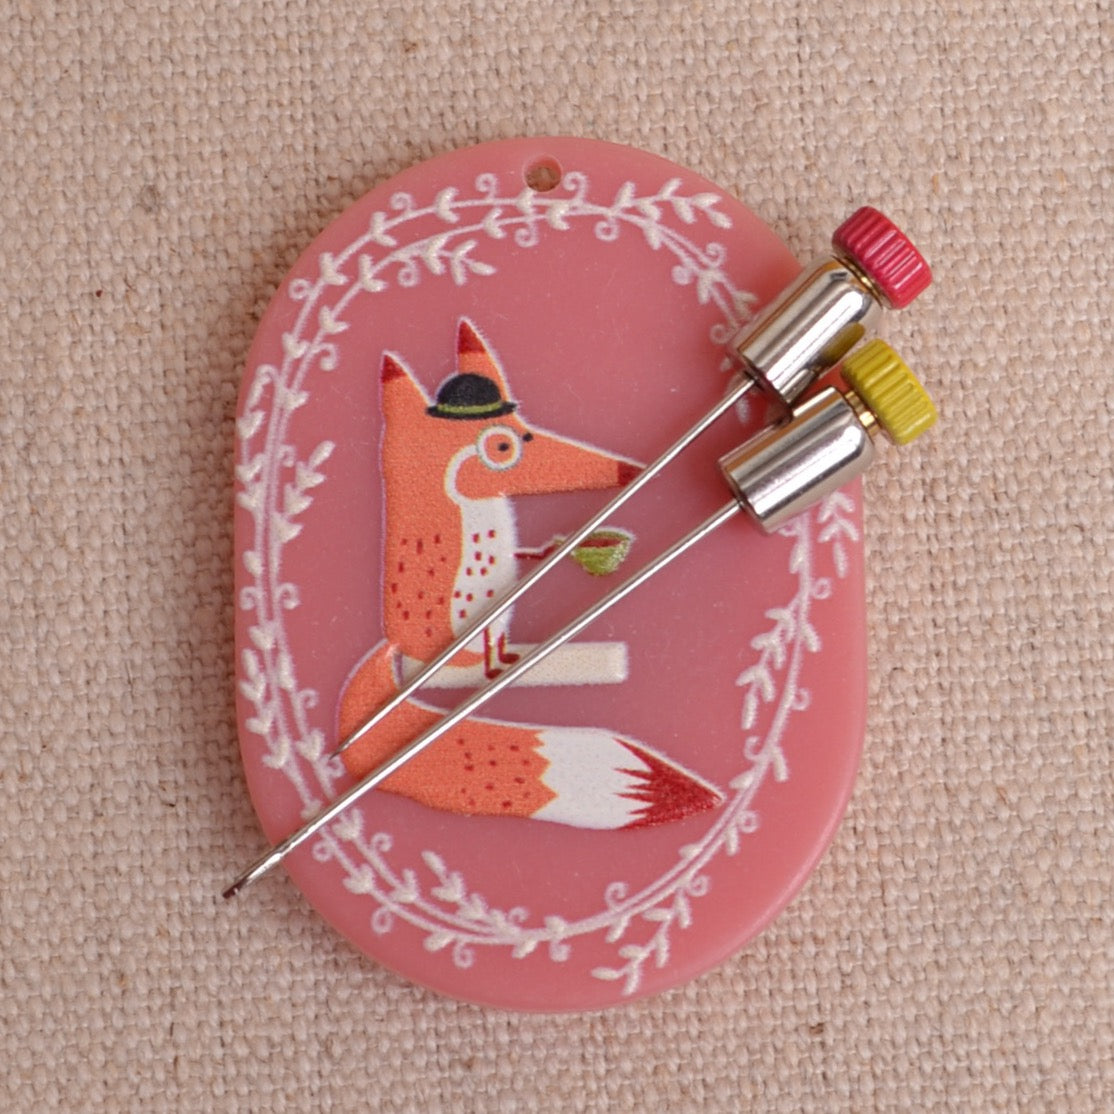 Embroidery needles with Little  House Needle Caps on magnetic needle minder